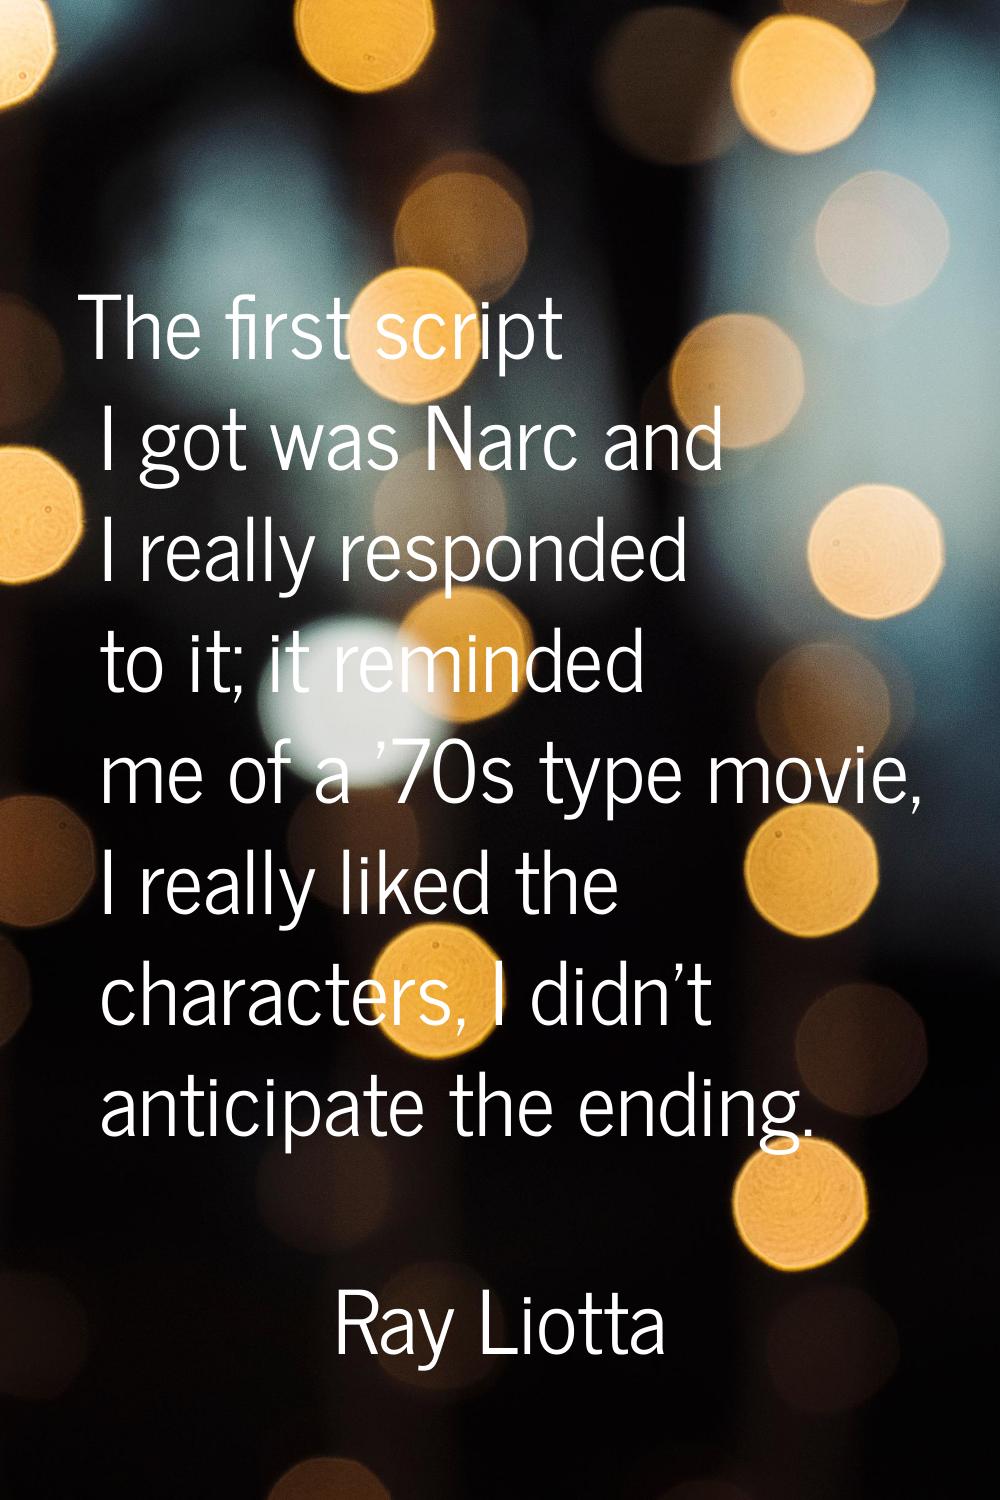 The first script I got was Narc and I really responded to it; it reminded me of a '70s type movie, 